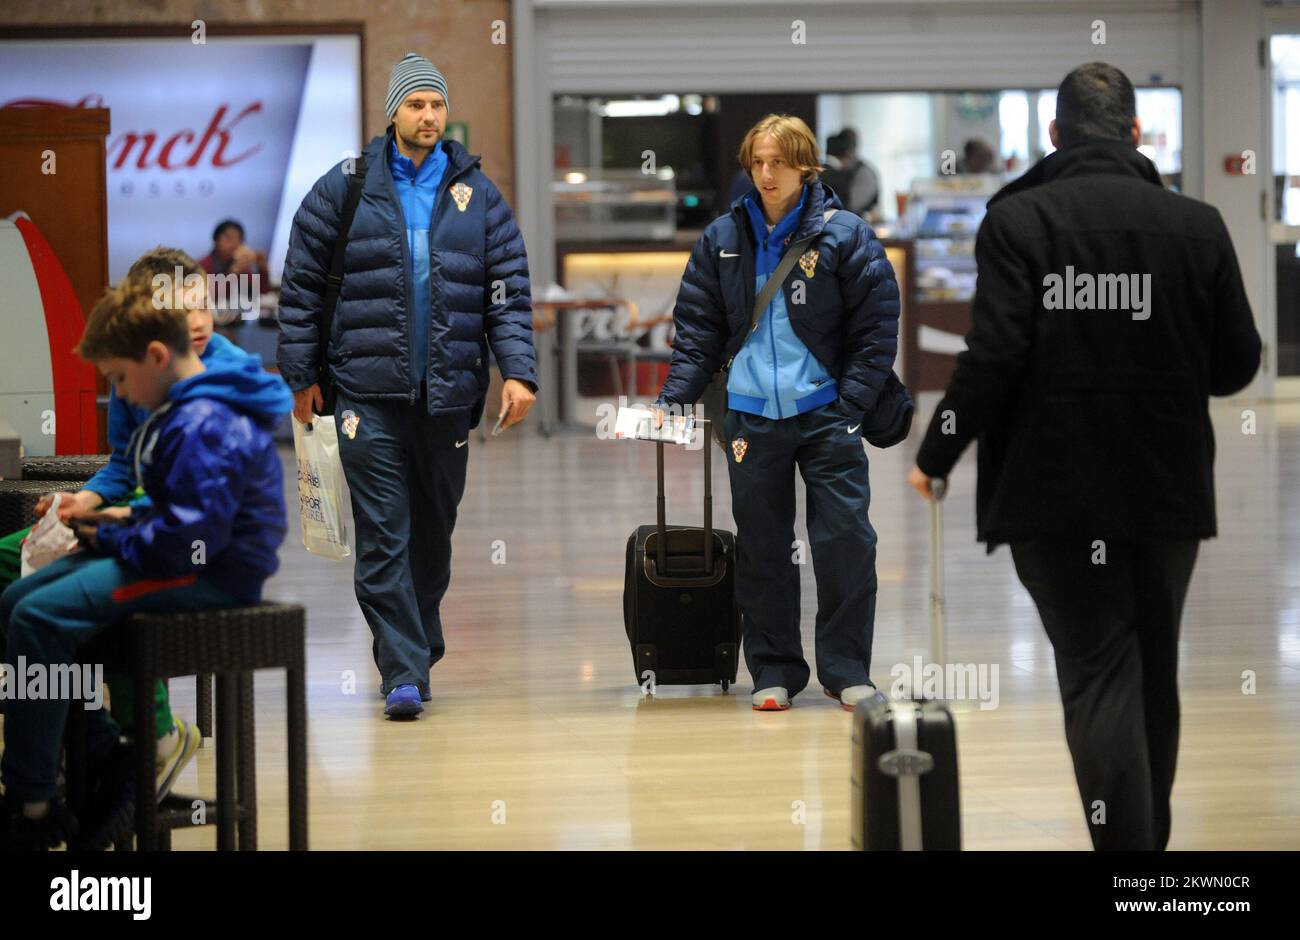 Verdrun Corluka and Luka Modric seen at Zagreb airport in Croatia in preparation for their World Cup 2014 qualifying fixture against Wales. Stock Photo